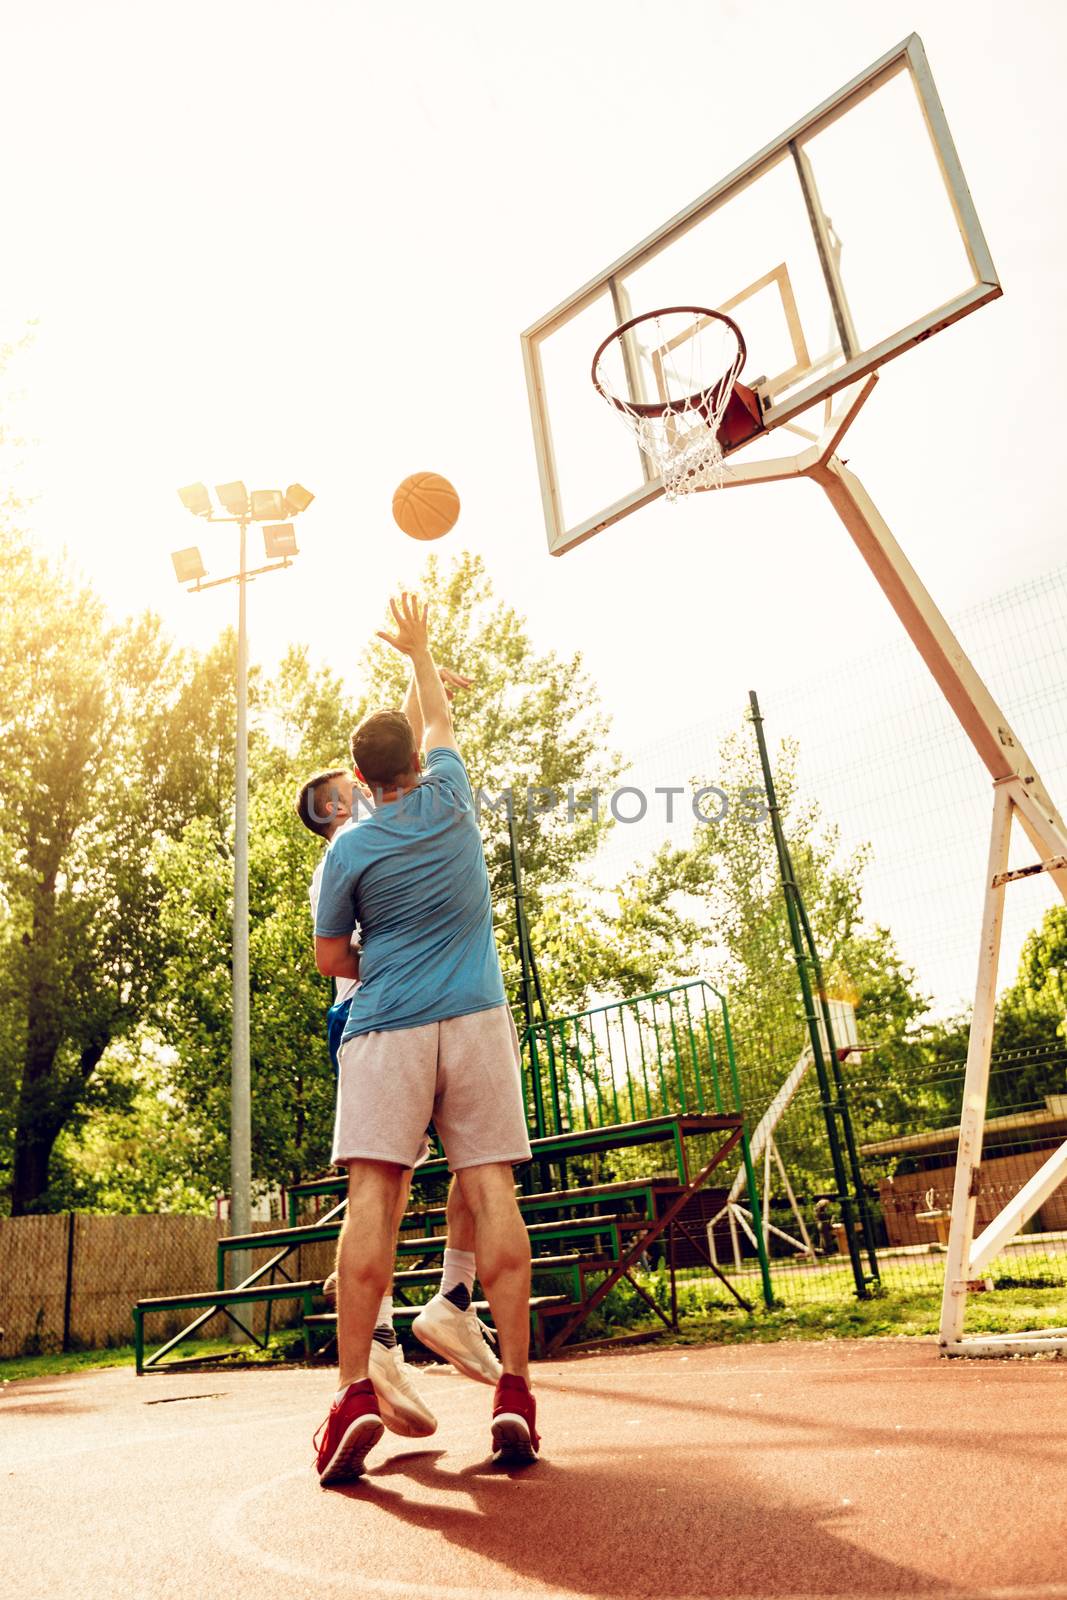 Basketball One On One by MilanMarkovic78